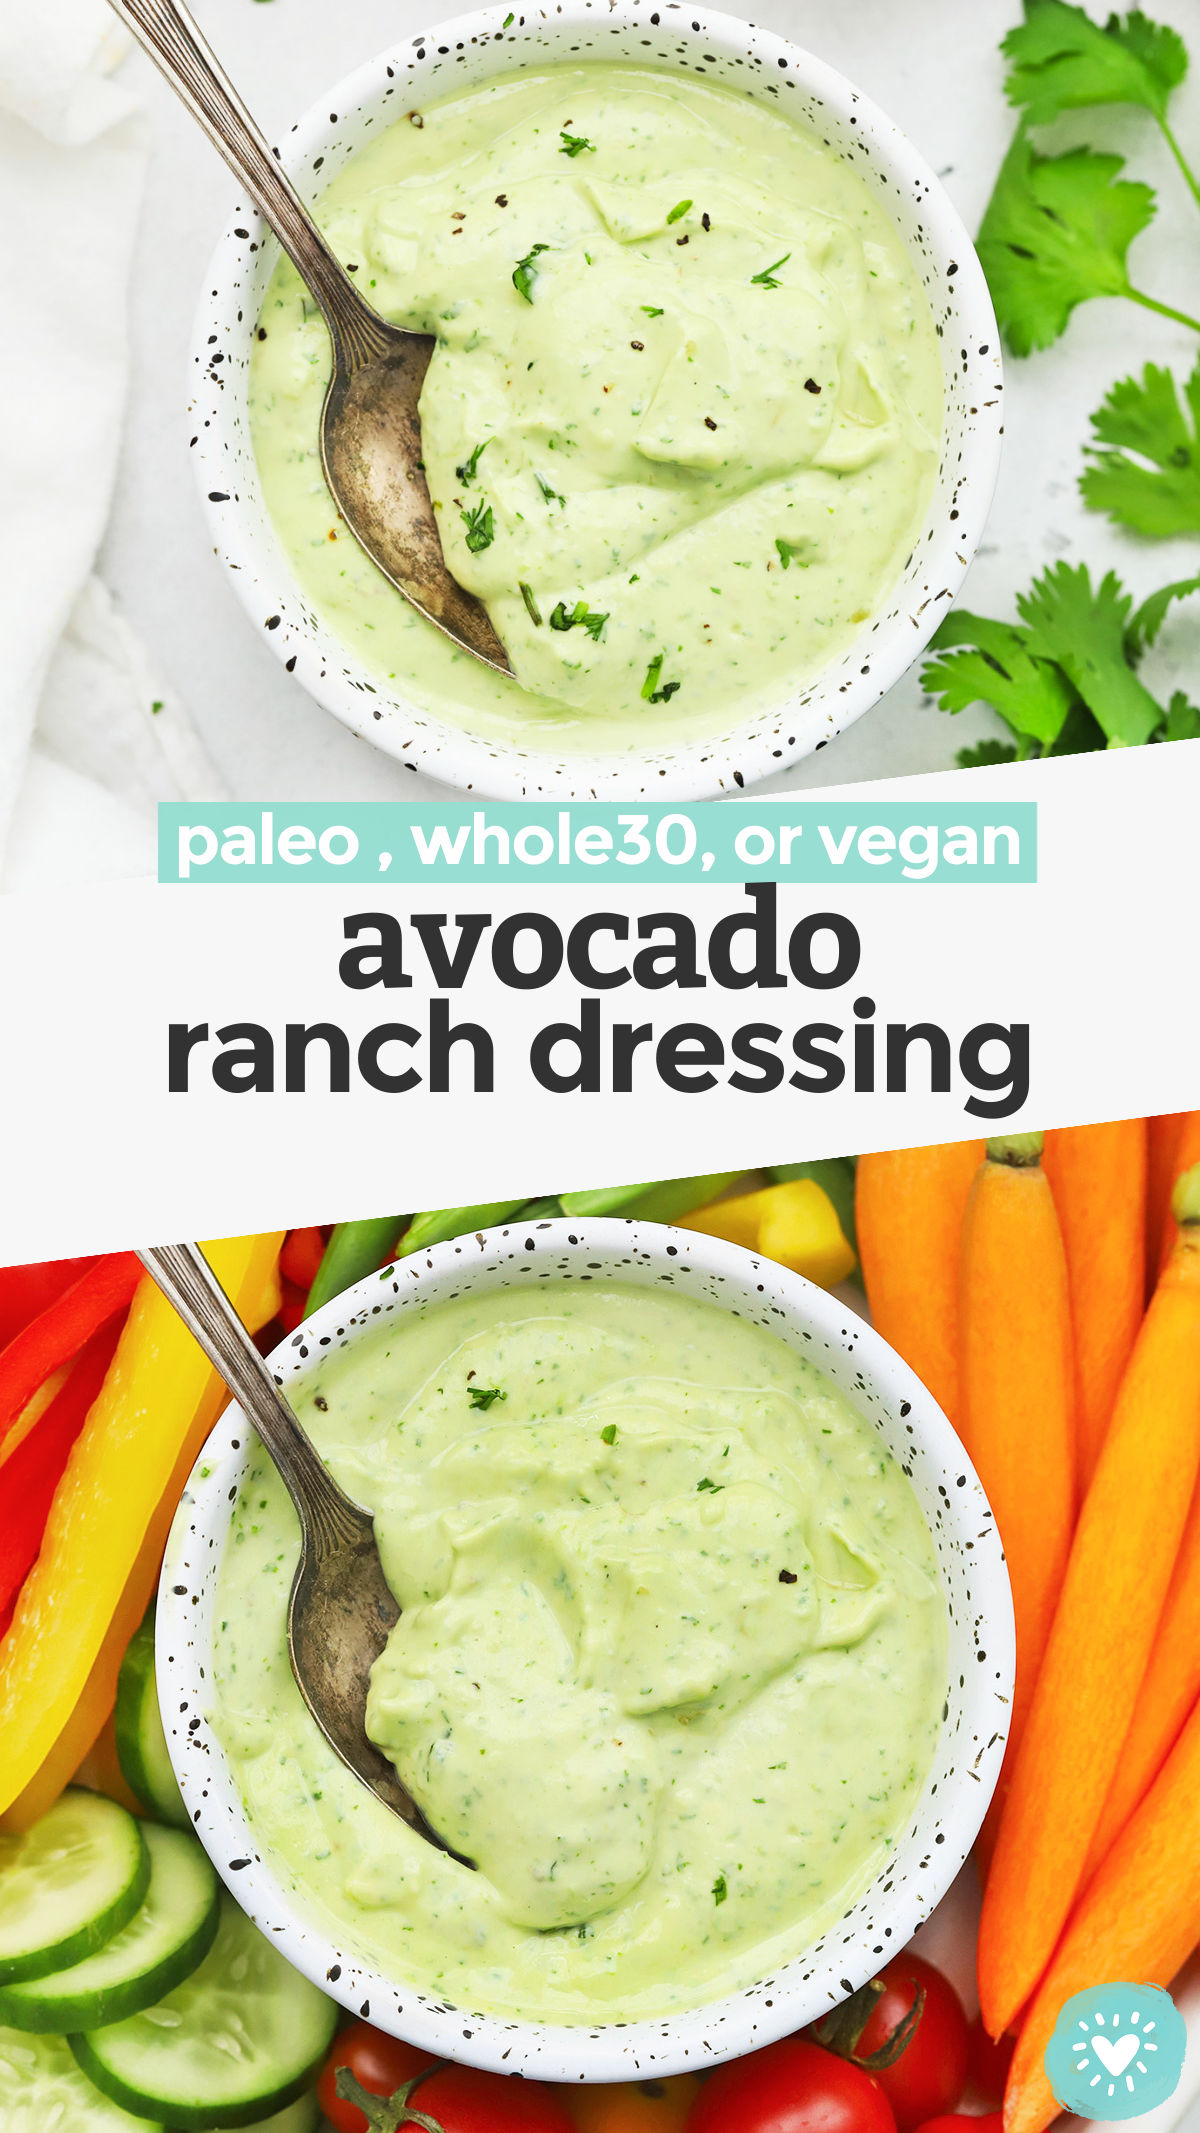 Creamy Avocado Ranch - This avocado ranch dressing recipe is everything I love about ranch dressing and avocados combined! It's an awesome dip for veggies, addition to tacos, or topping for salads. // Paleo Avocado Ranch // Vegan Avocado Ranch // Avocado Ranch Dip // Whole30 Avocado Ranch #paleoranch #avocadoranch #healthydip #avocado